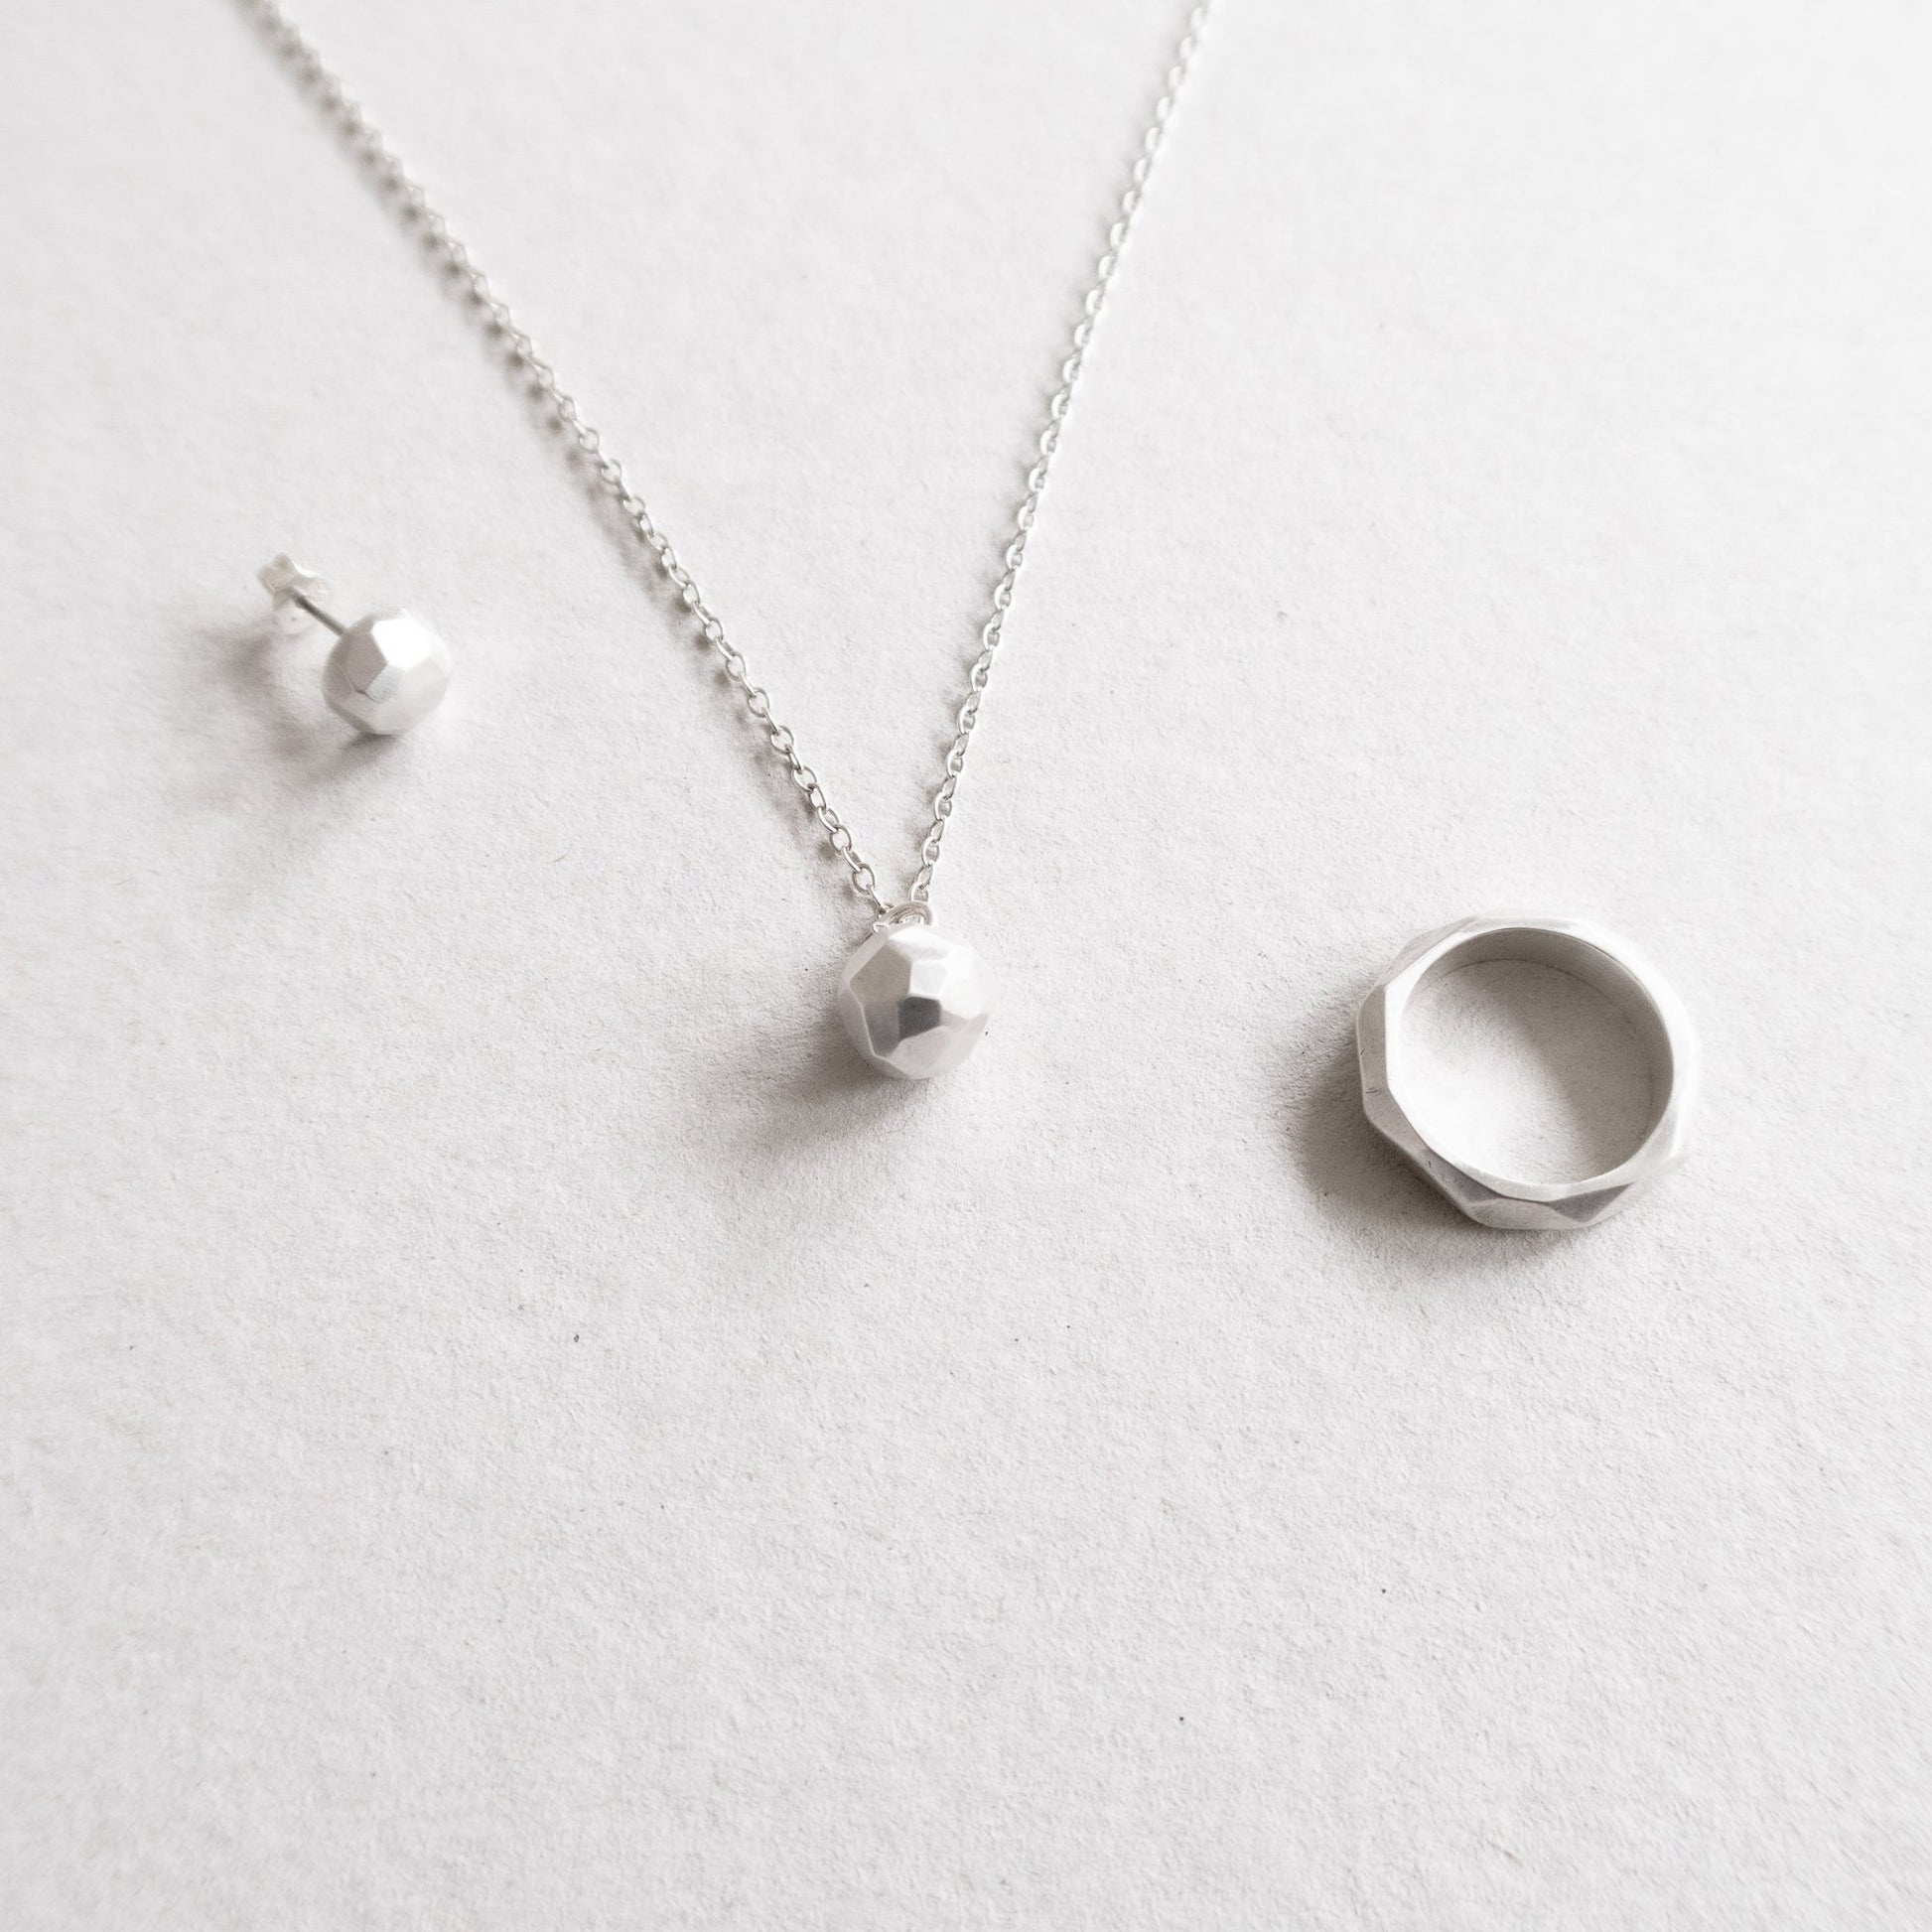 facet series, ring necklace and ear stud of mezereem jewelry